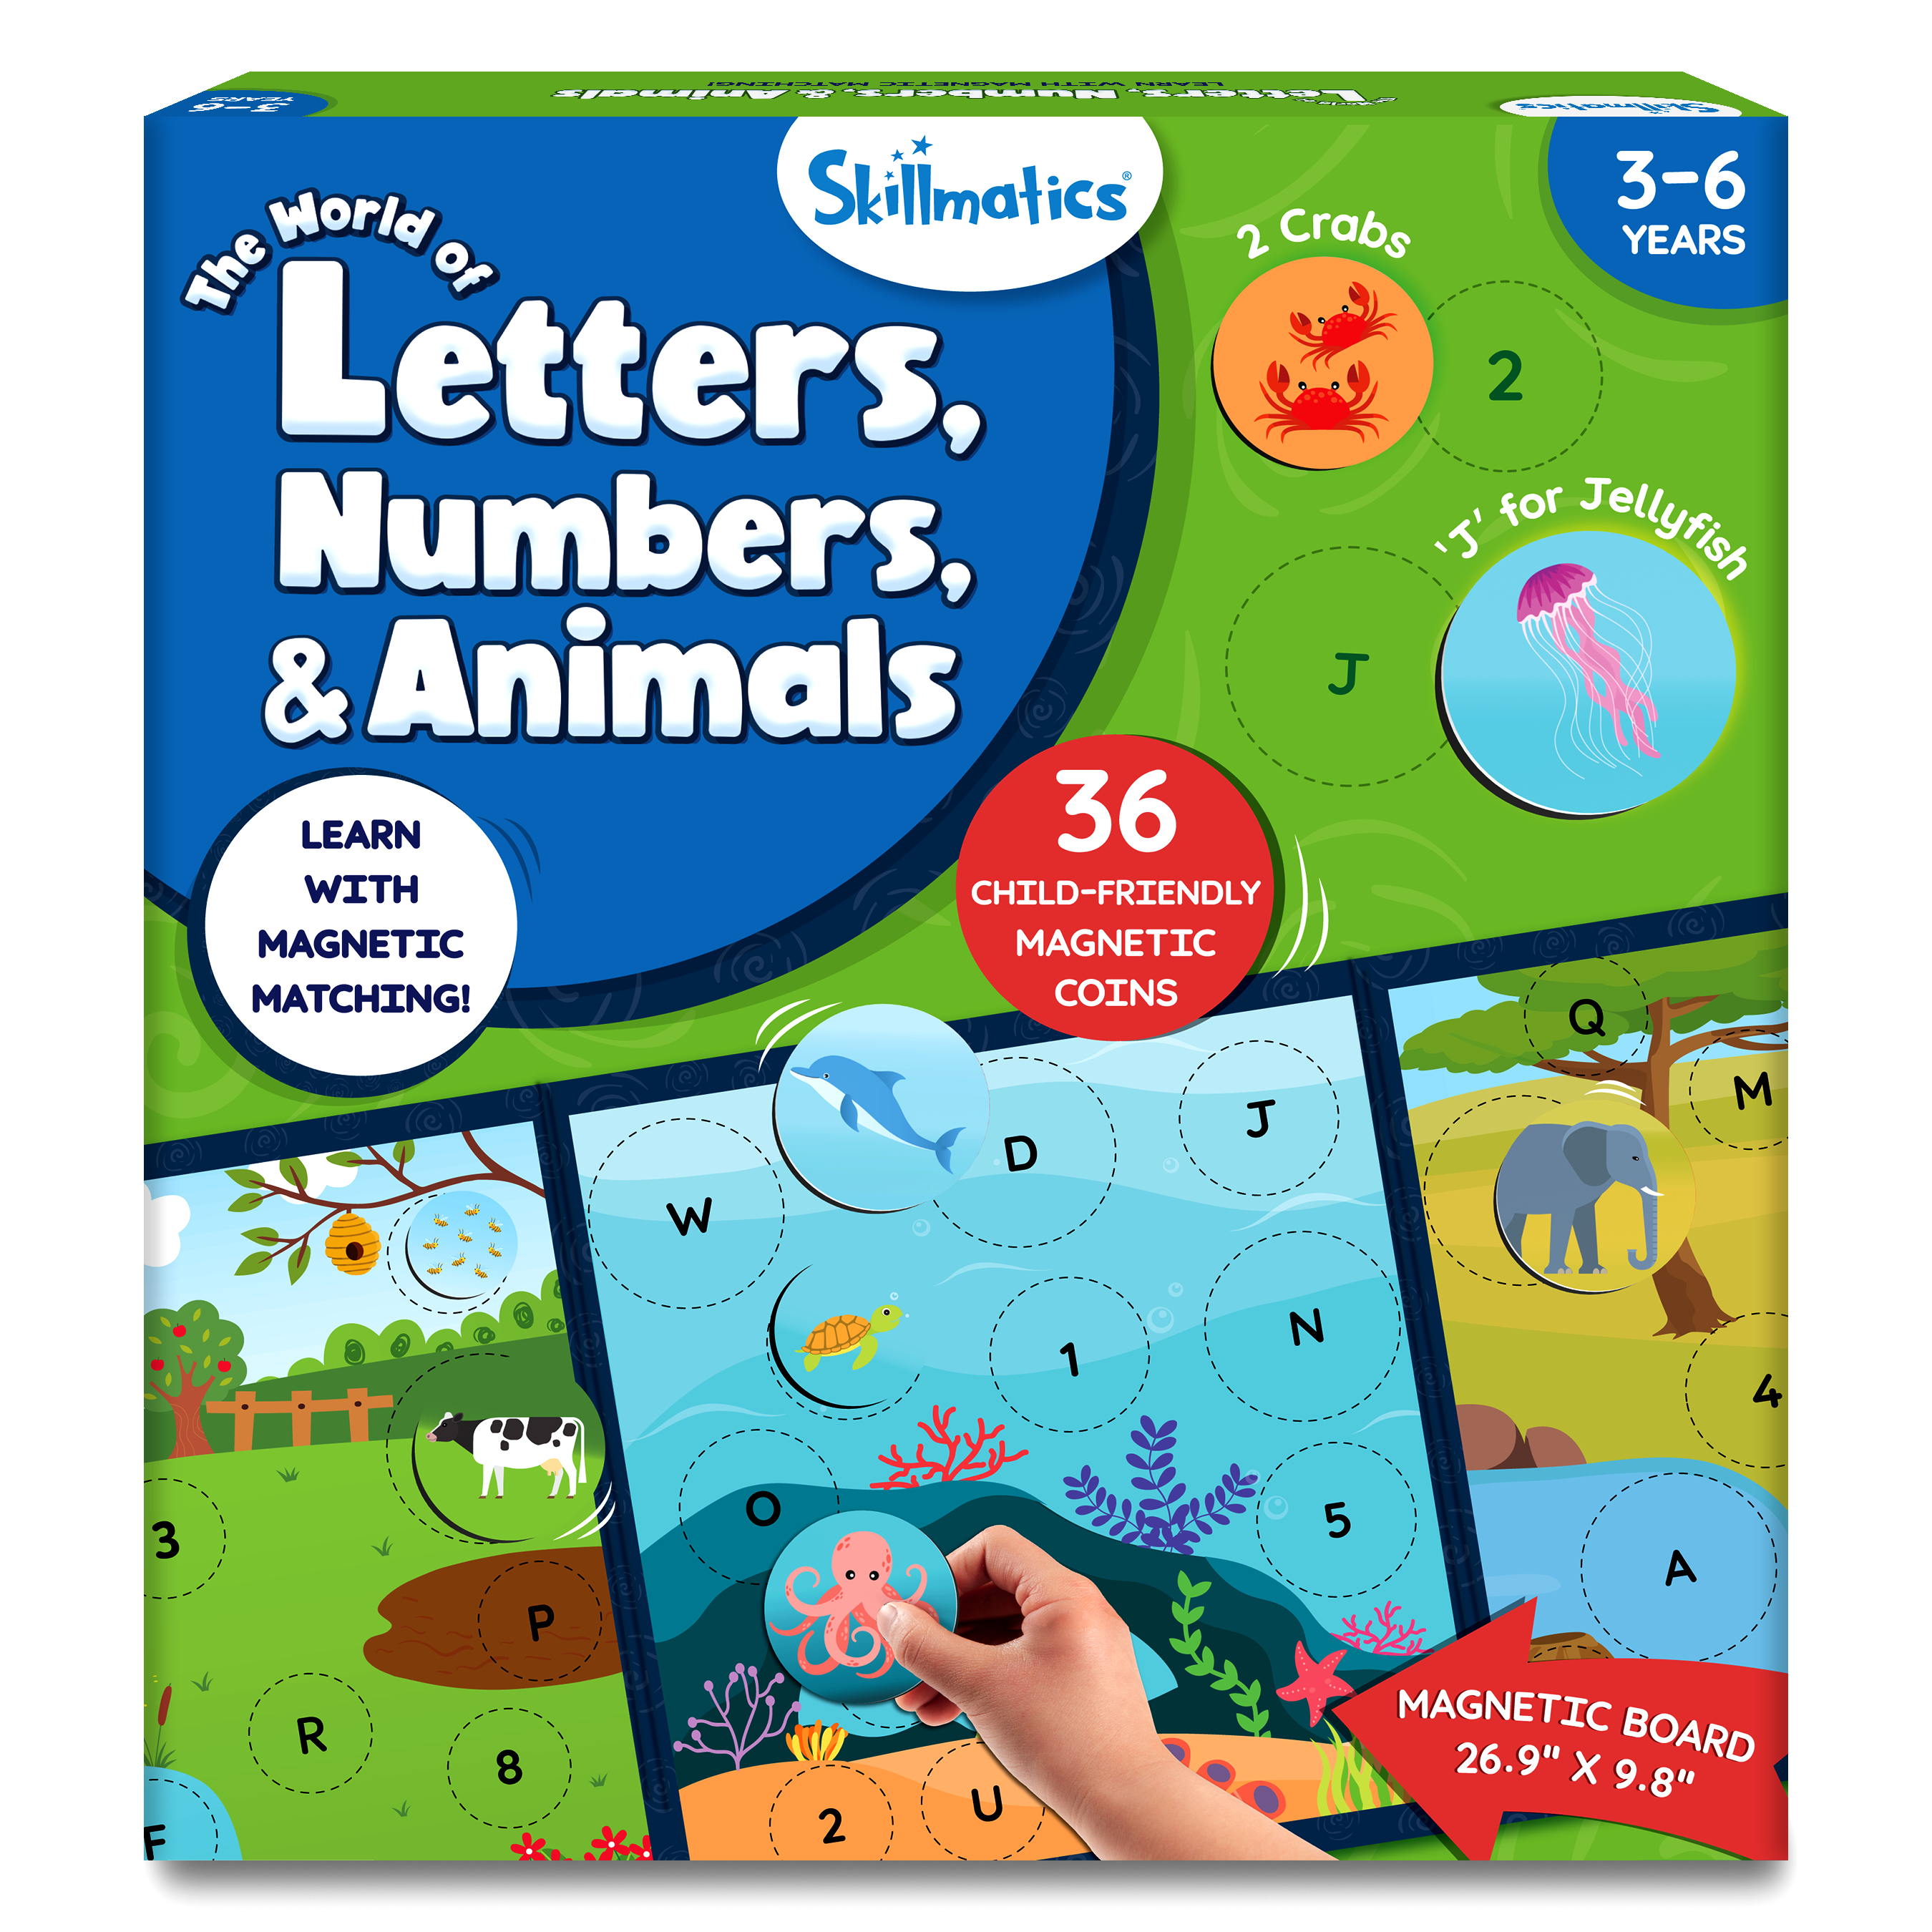 Skillmatics Magnetic Matching Activity - Letters, Numbers & Animals, Preschool Learning Toy & Game for Kids, 35+ Magnetic Pieces, Gifts for Boys & Girls Ages 3, 4, 5, 6